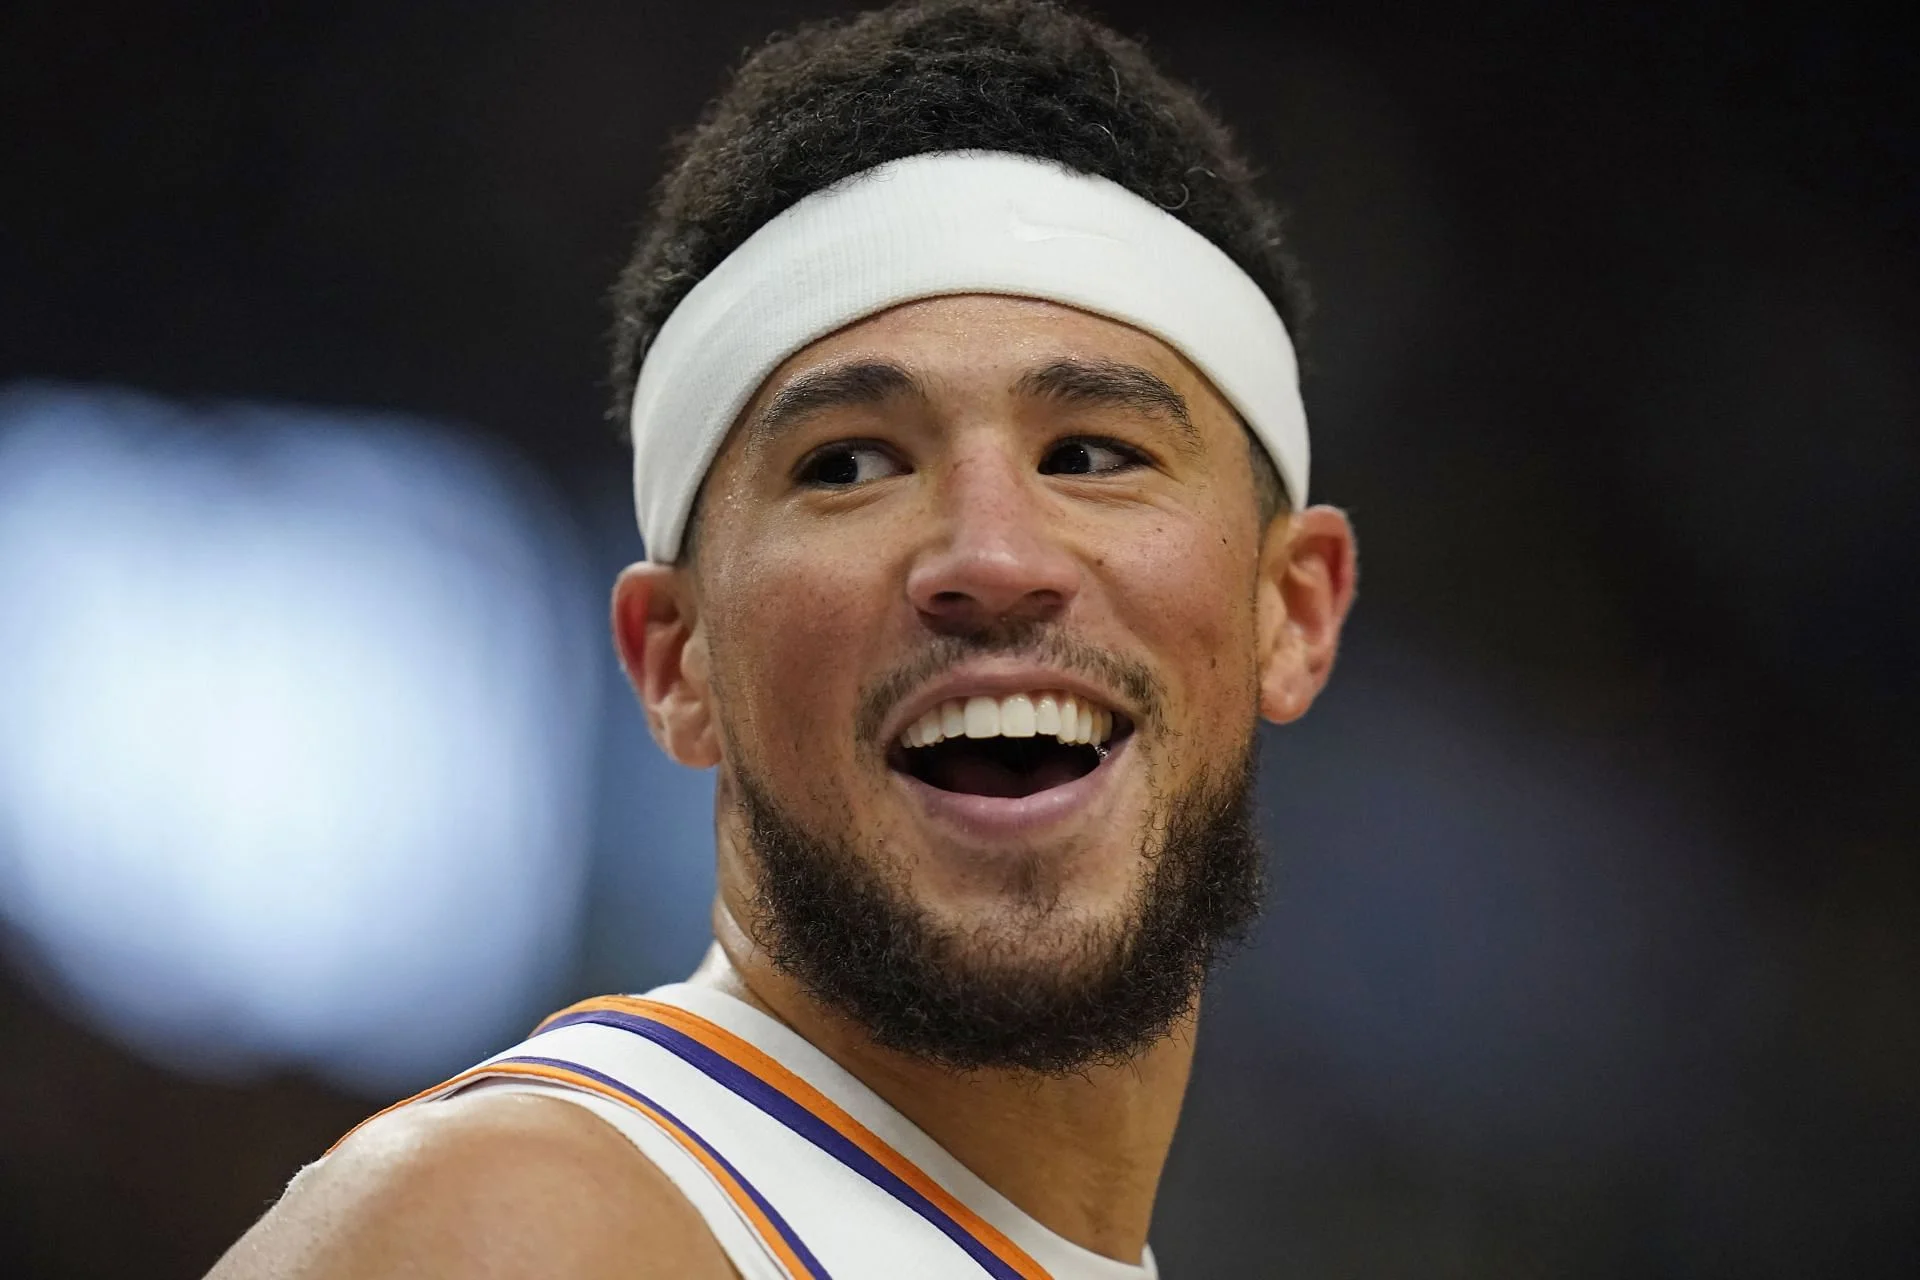 Devin Booker's GTA 6 Rumor Busted: The Truth Behind Suns Star's Viral Story